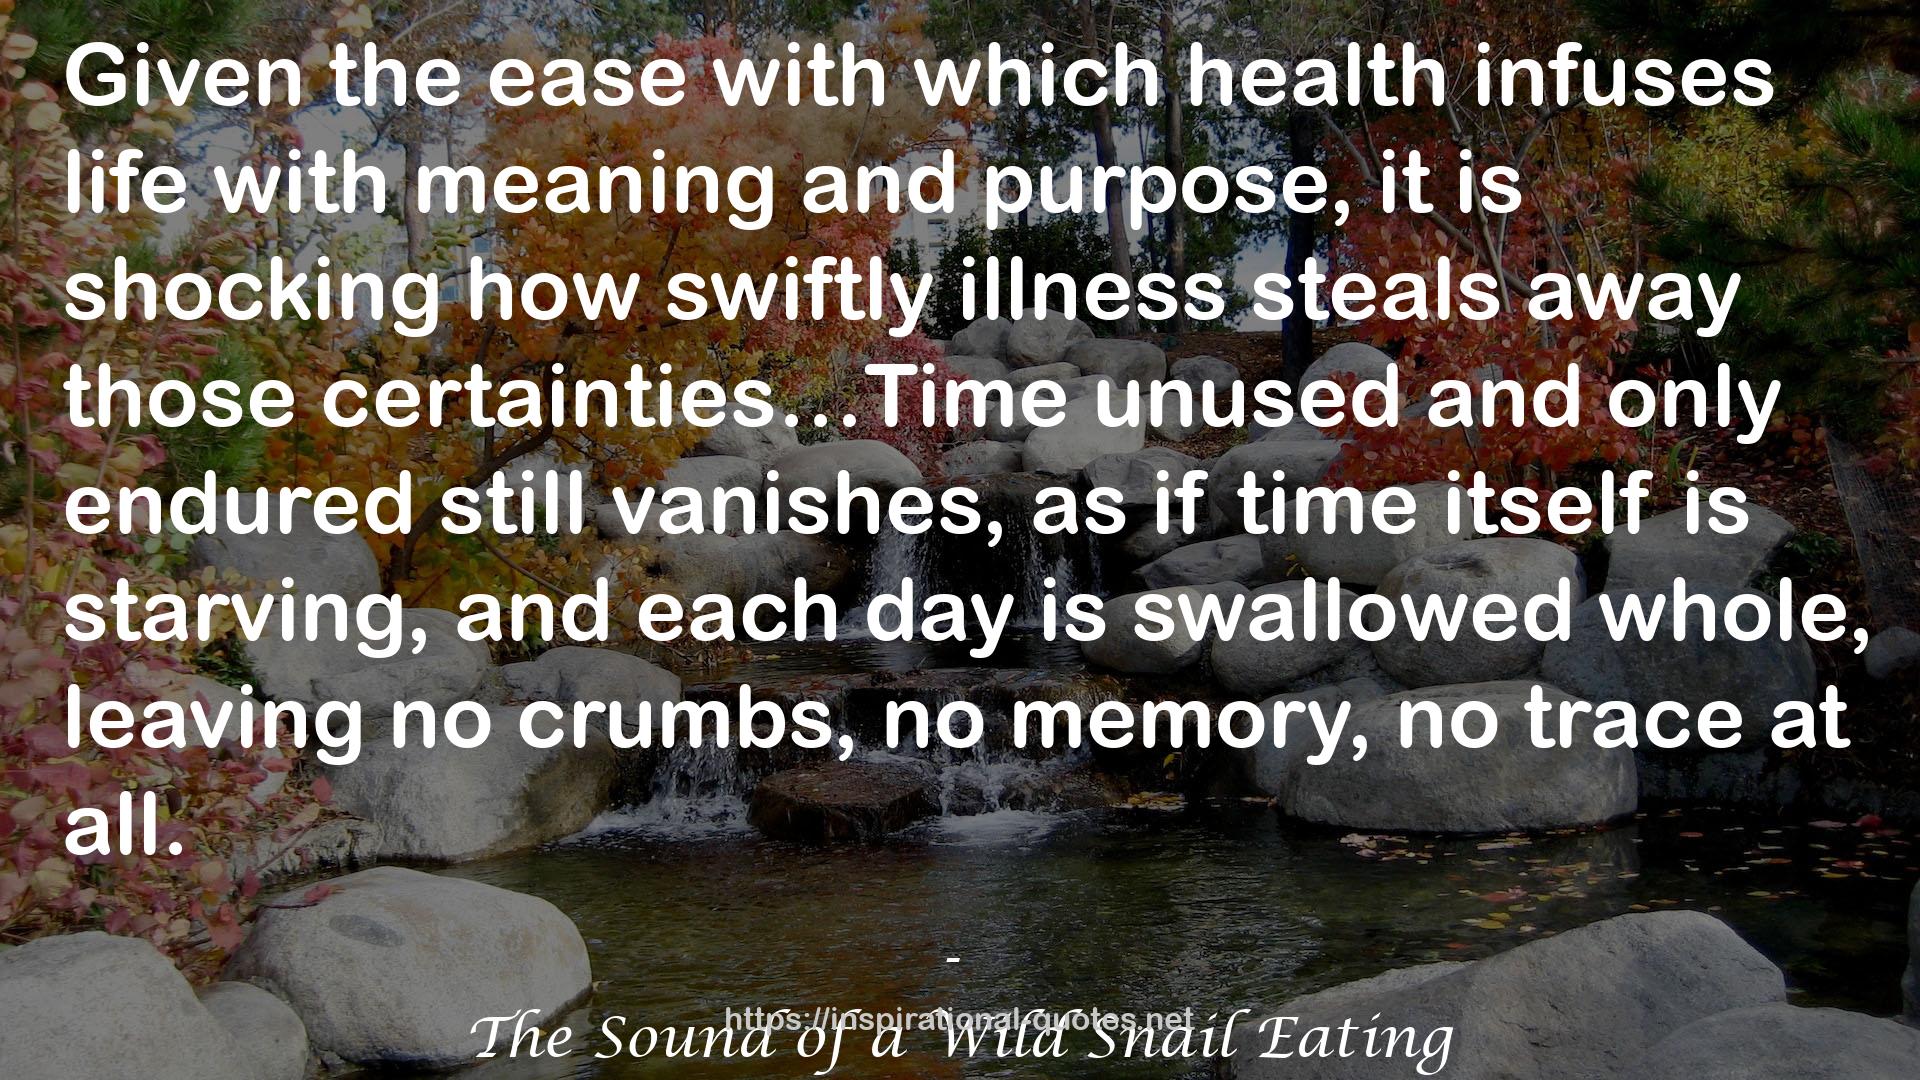 The Sound of a Wild Snail Eating QUOTES